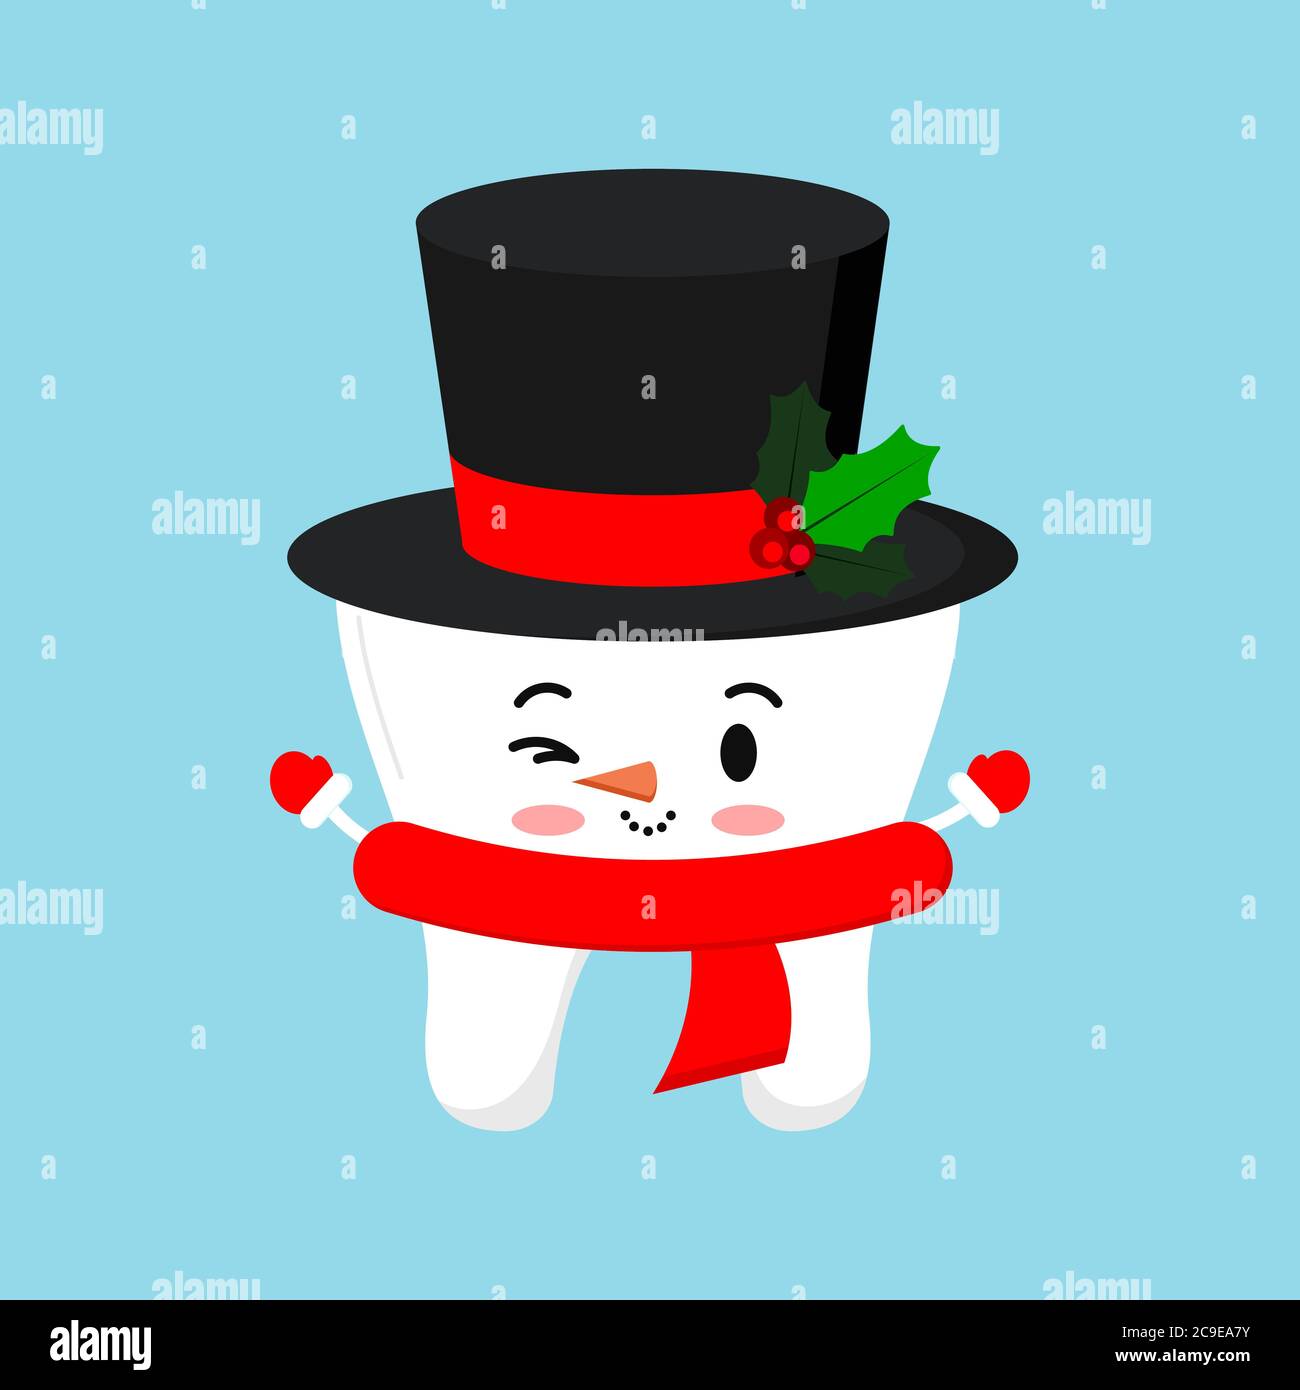 Tooth Cartoon Banque d'image et photos - Page 8 - Alamy